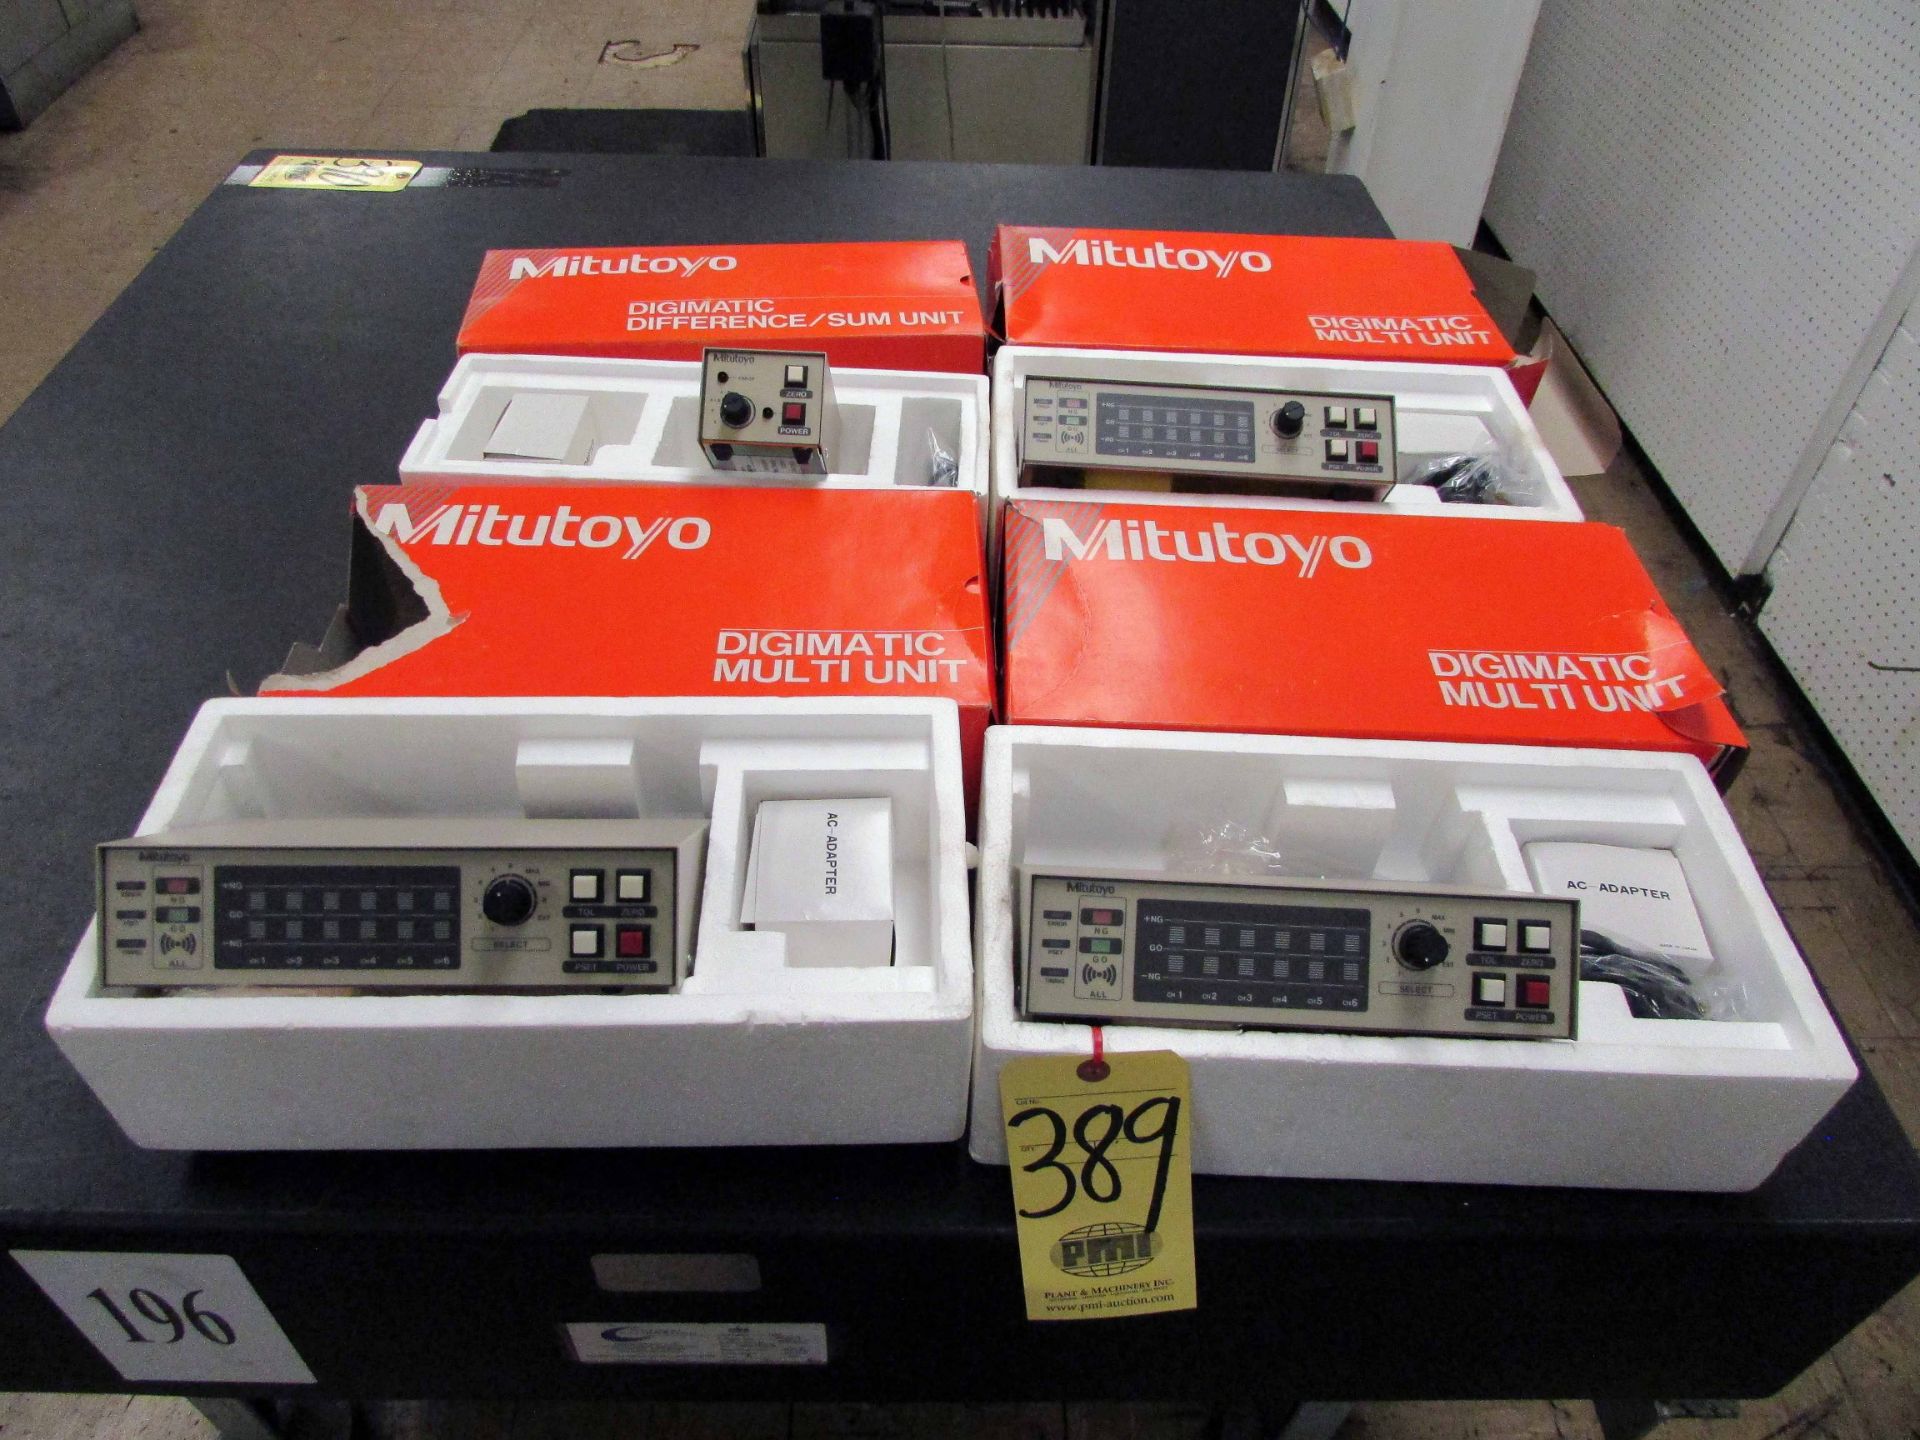 LOT OF DIGIMATIC MULTI UNIT, MITUTOYO MDL. SD-M1 (3), w/ (1) Mitutoyo SD-UI Digimatic difference/